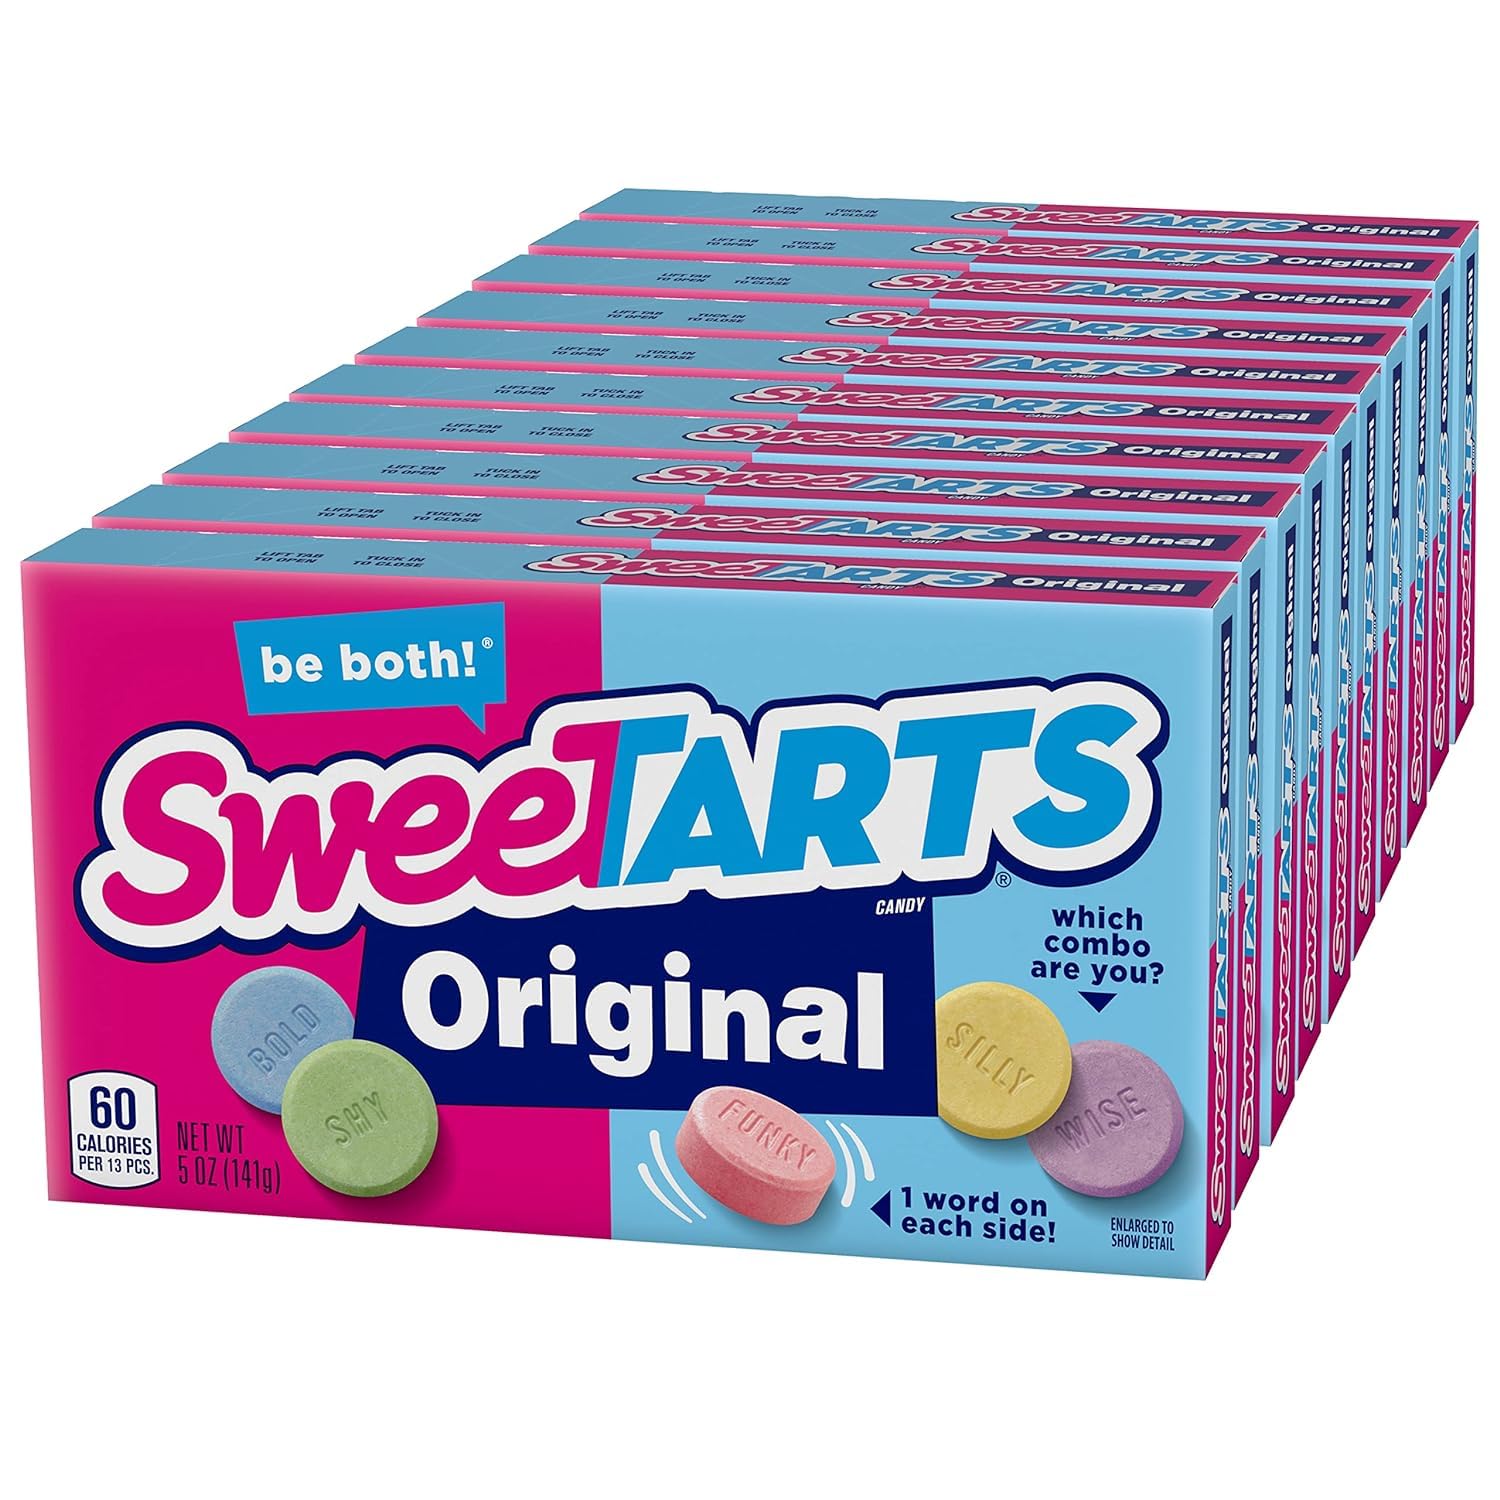 10-Pack of 5-Oz SweeTARTS Original Candy Theater Box $9.92 w/ S&S + Free Shipping w/ Prime or on $35+